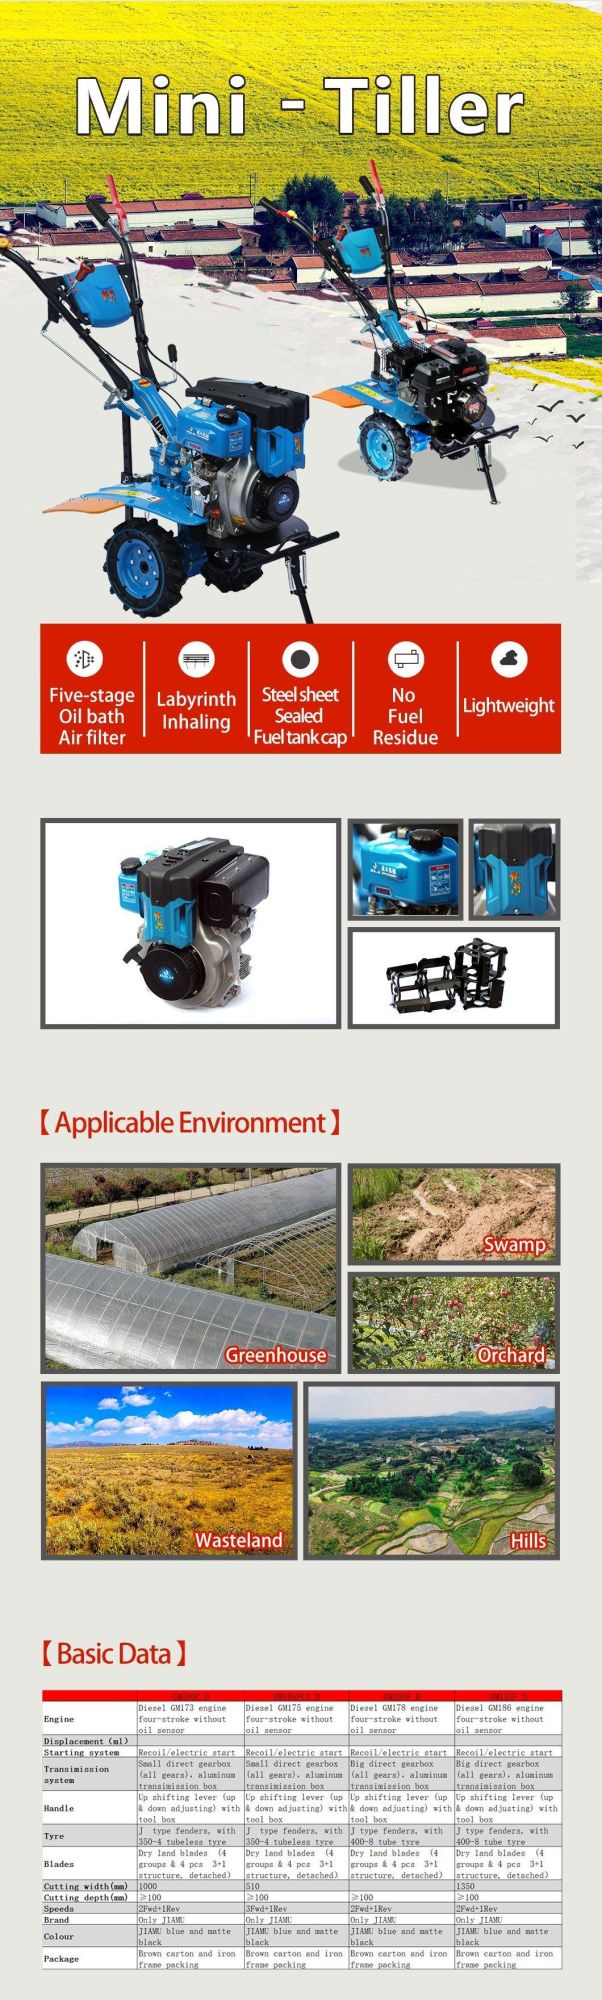 Jiamu GM135f D with GM186 All Gear Aluminum transmission Box Agricultural Machinery Recoil Start Diesel D-Stylepower Tiller Tractor for Sale